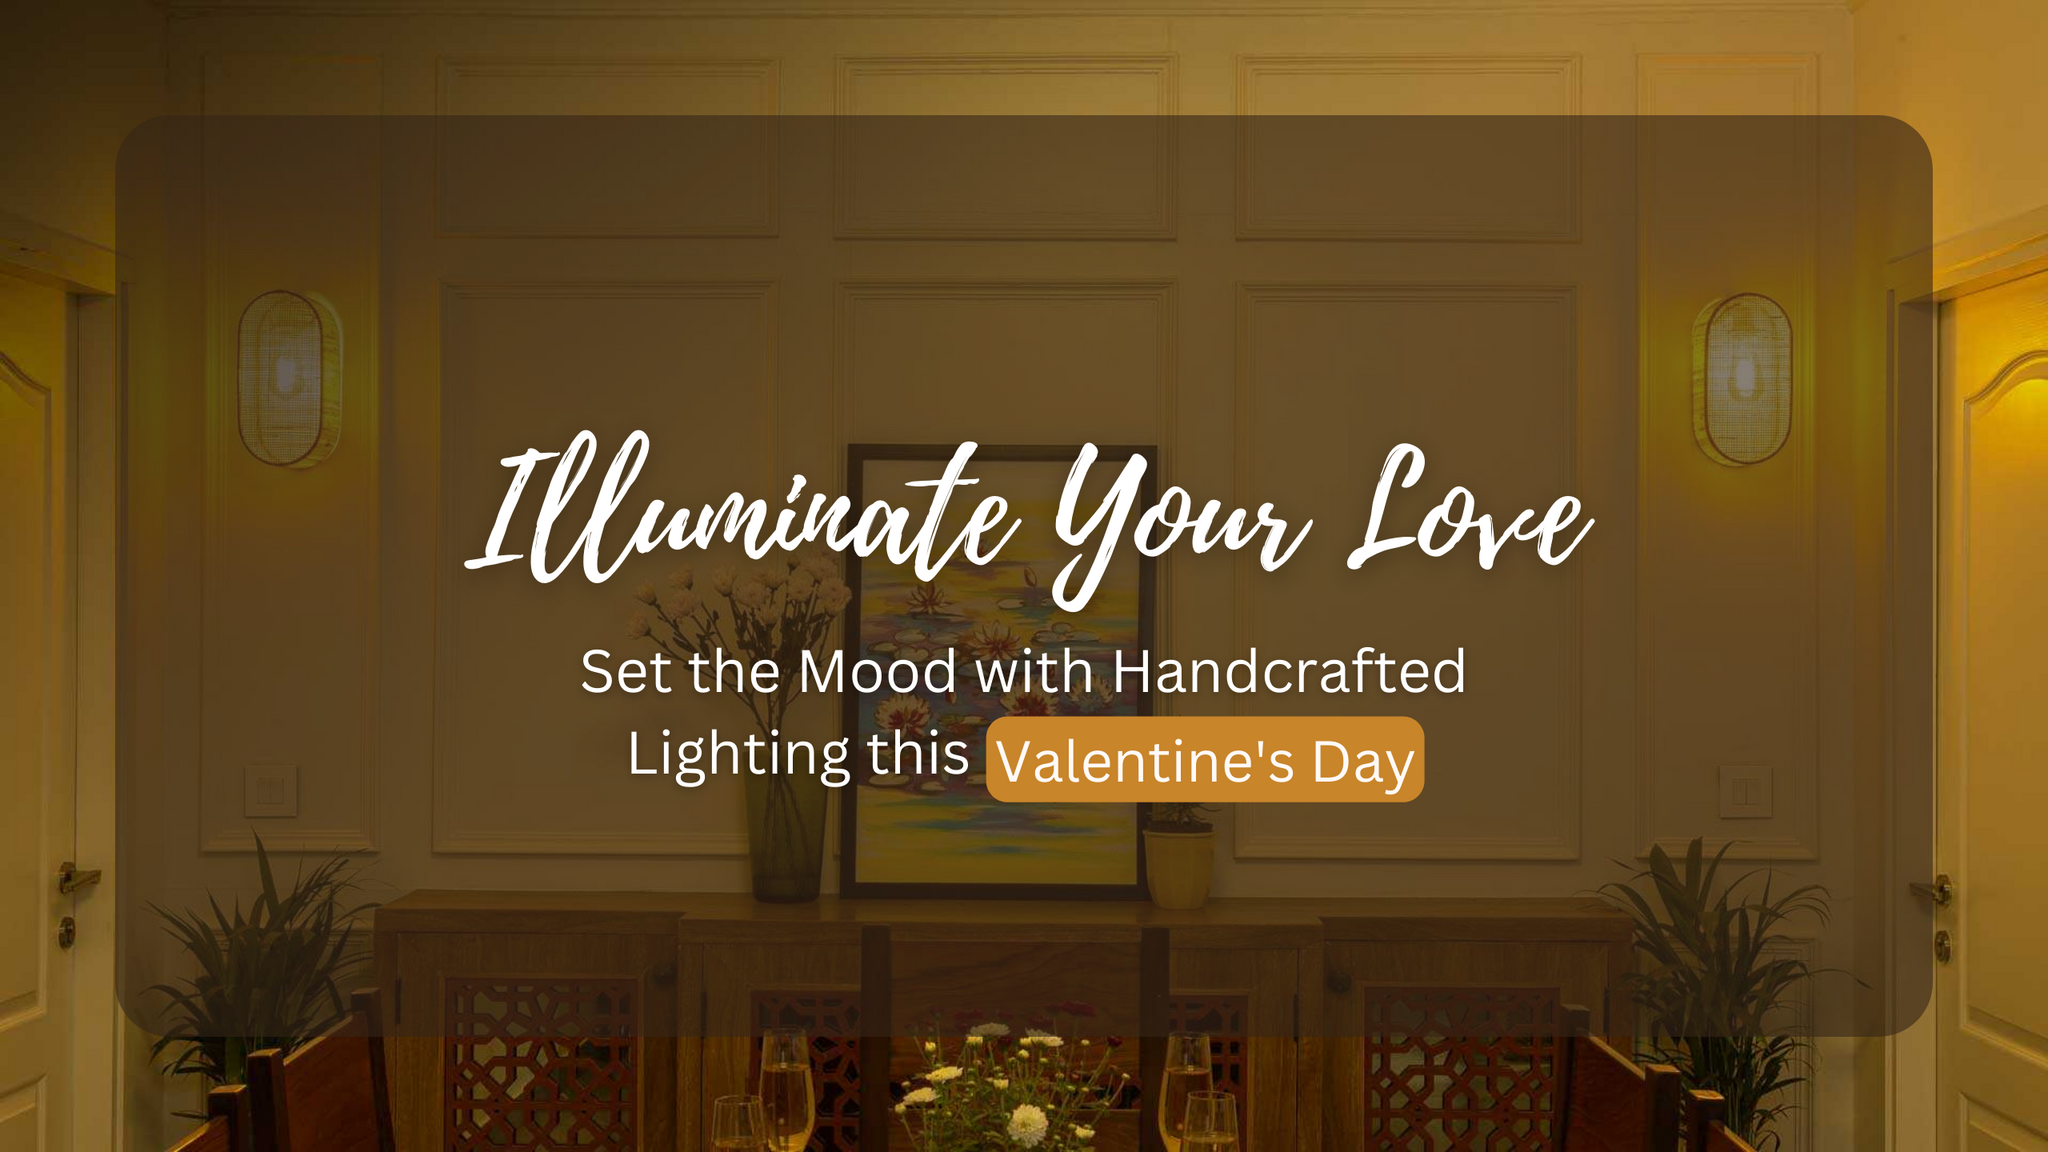 Illuminate Your Love - Set the Mood with Handcrafted Lighting this Valentine's Day